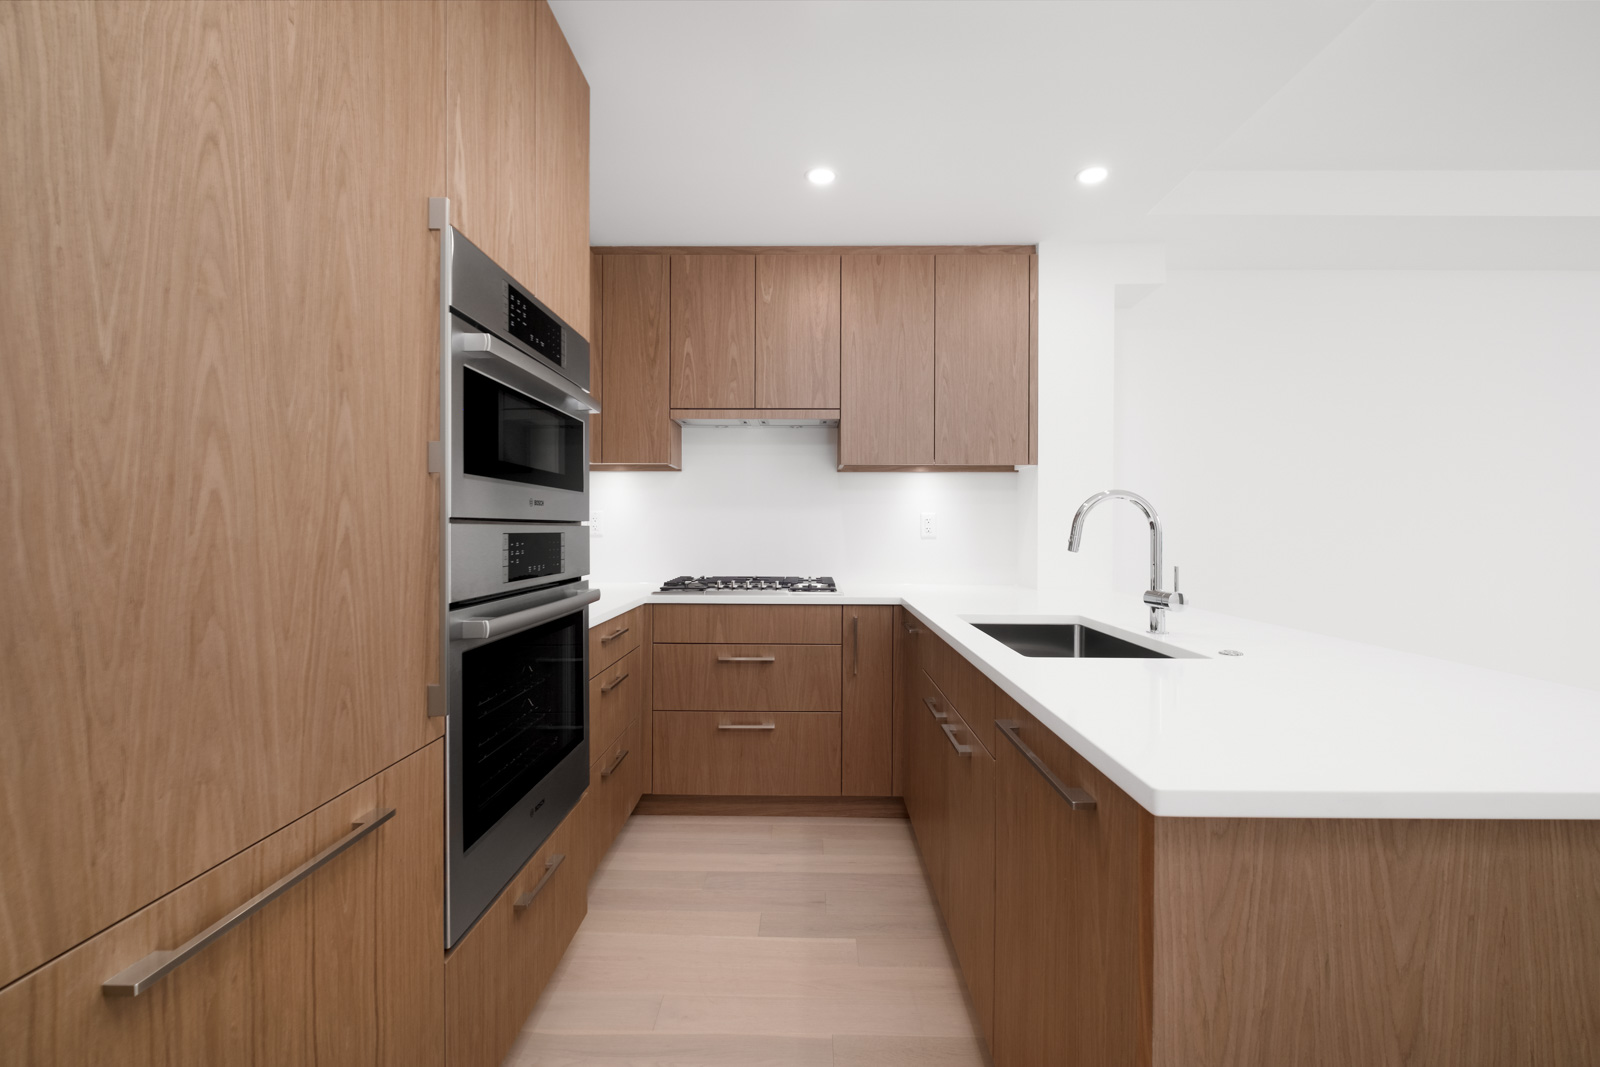 kitchen in rental condo at Hawthorne in the Cambie Corridor neighbourhood of Vancouver